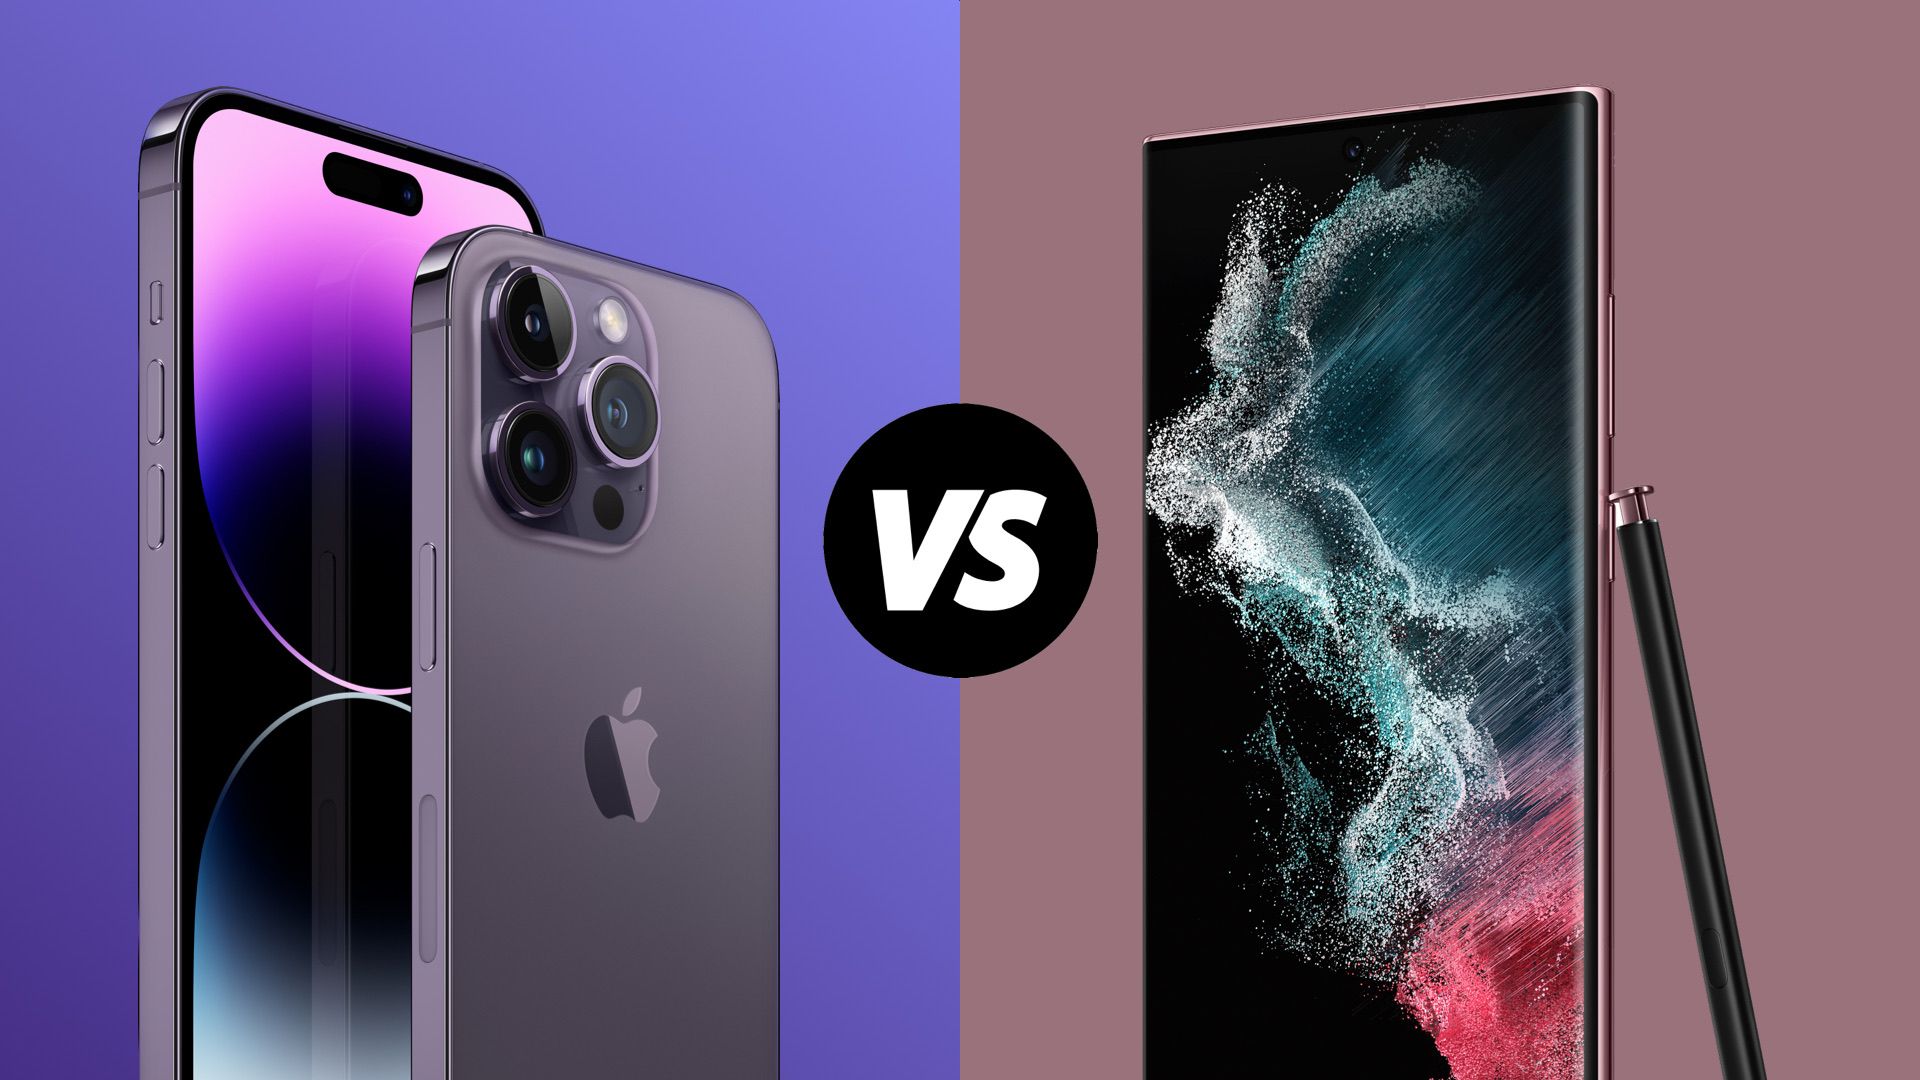 iPhone 14 Pro Max vs Samsung Galaxy S22 Ultra: Which should you buy